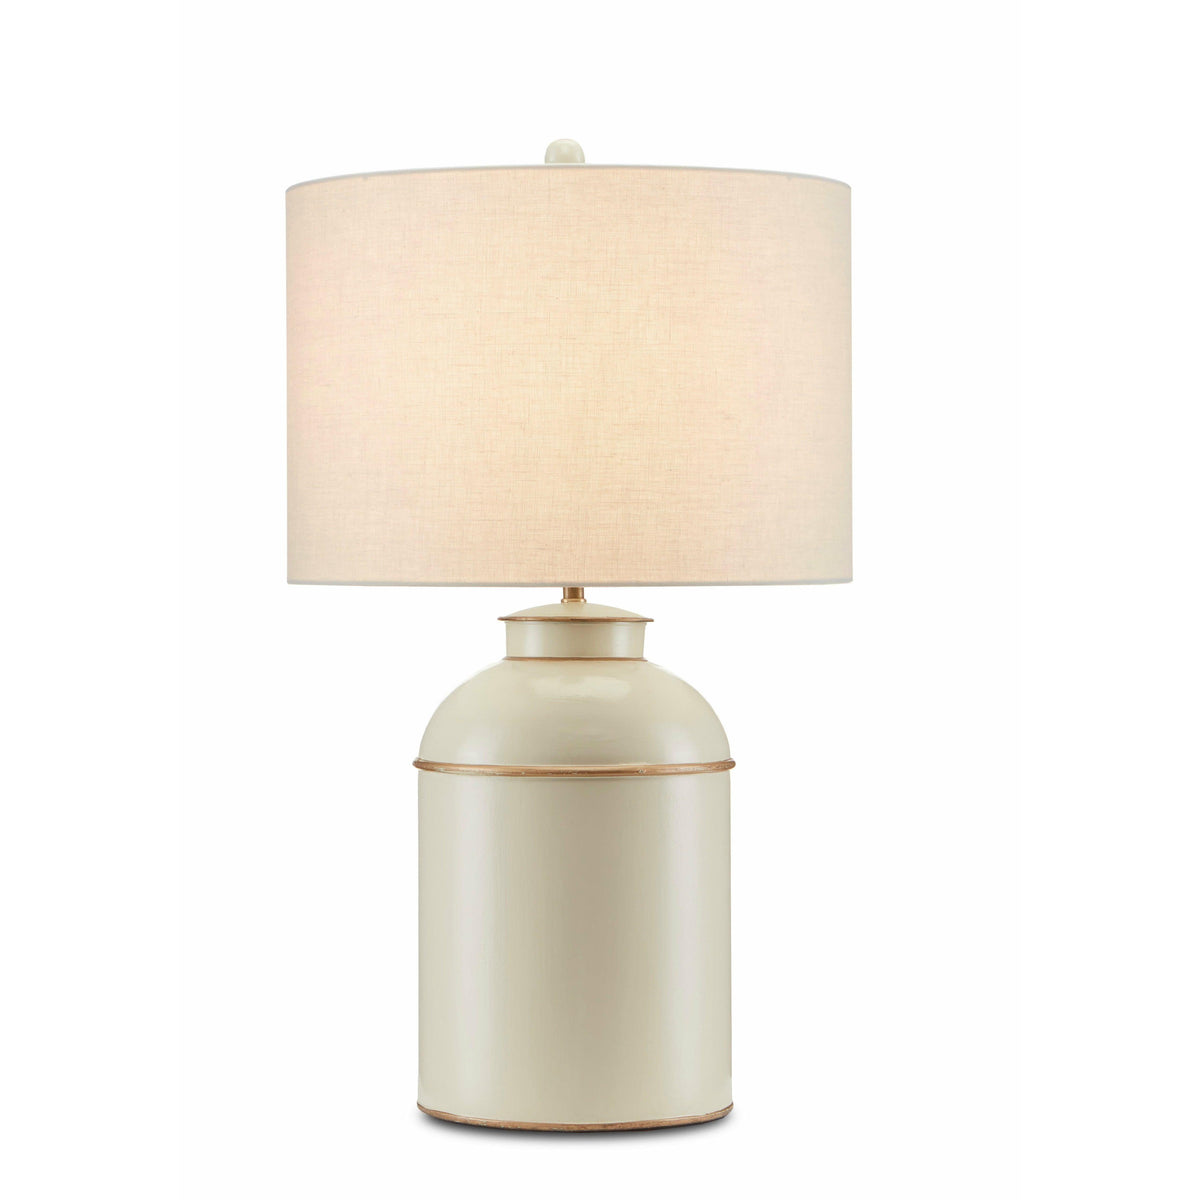 Currey and Company - London Table Lamp - 6000-0704 | Montreal Lighting & Hardware